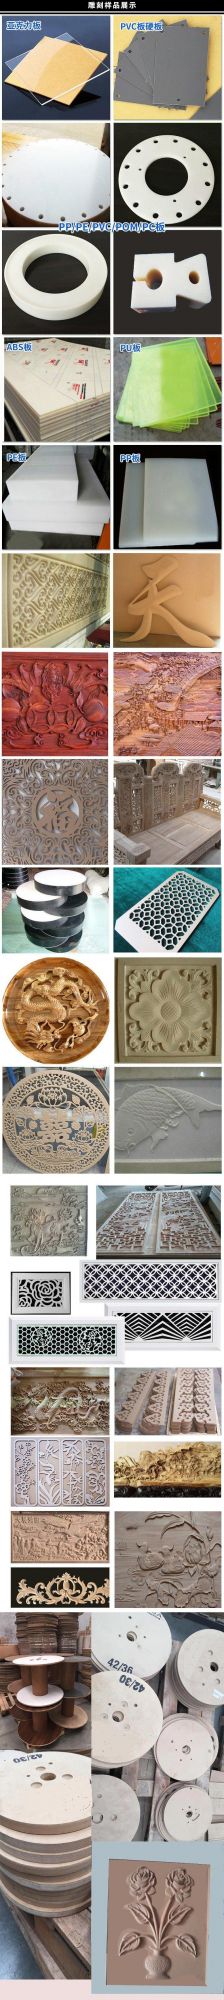 Factory MDF Wood Router Cutting Carving Engraving CNC Woodworking Machine